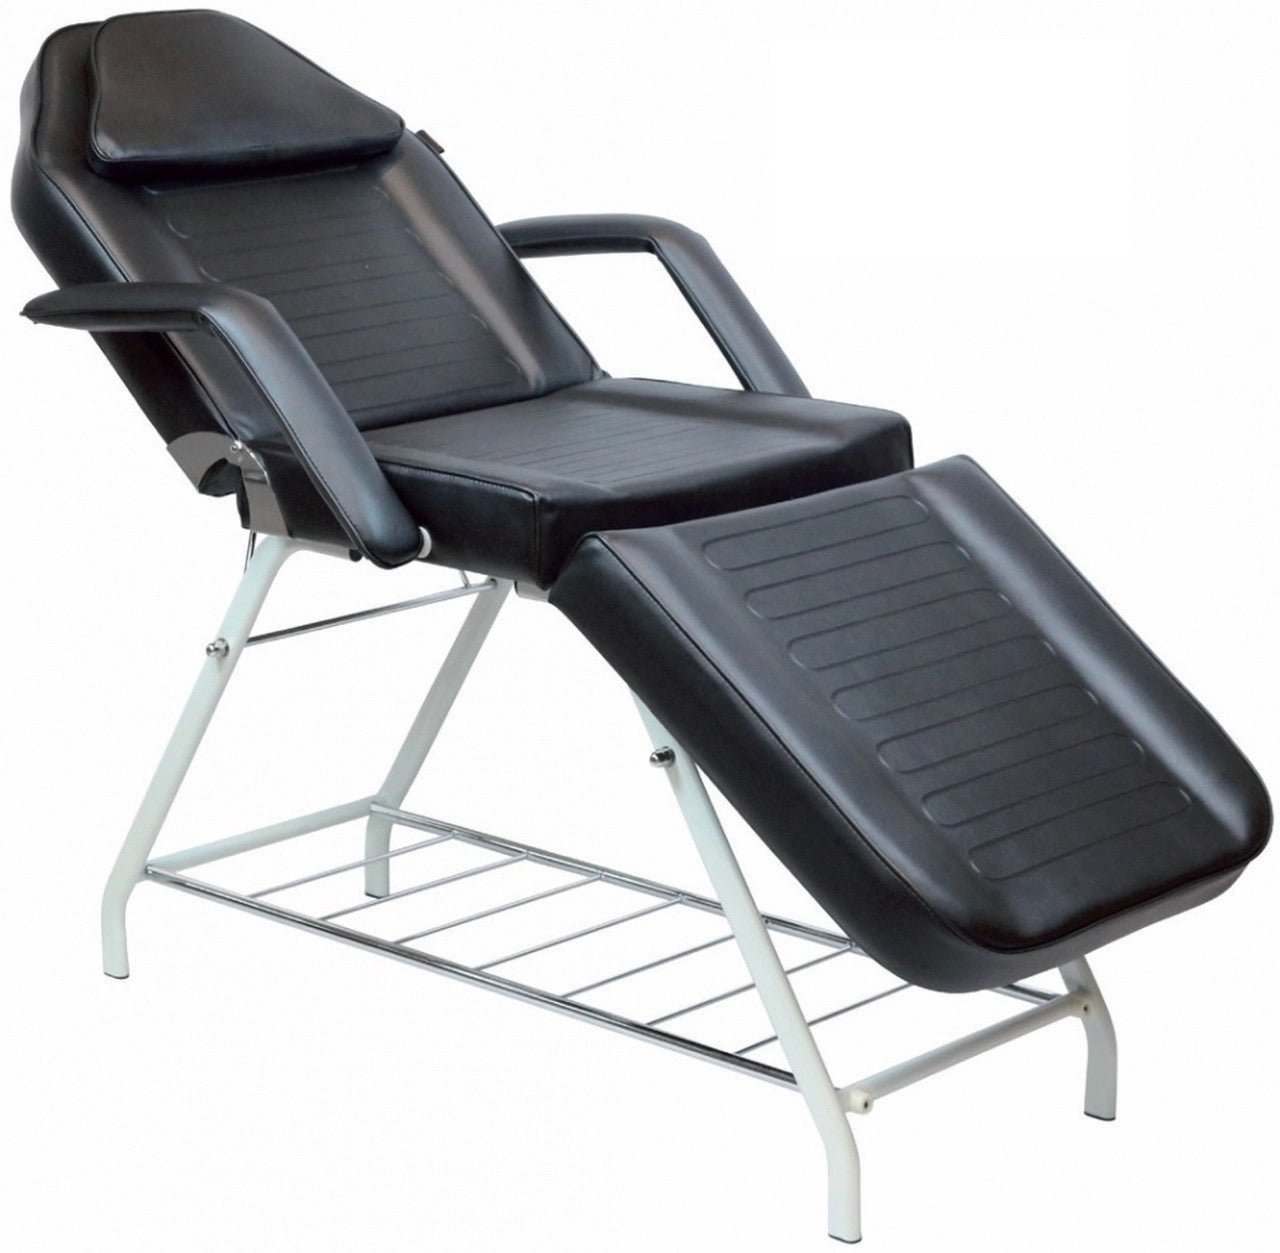 Joiken Tulip beauty salon bed in black colour with back rest in 45 degrees and leg rest partially extended